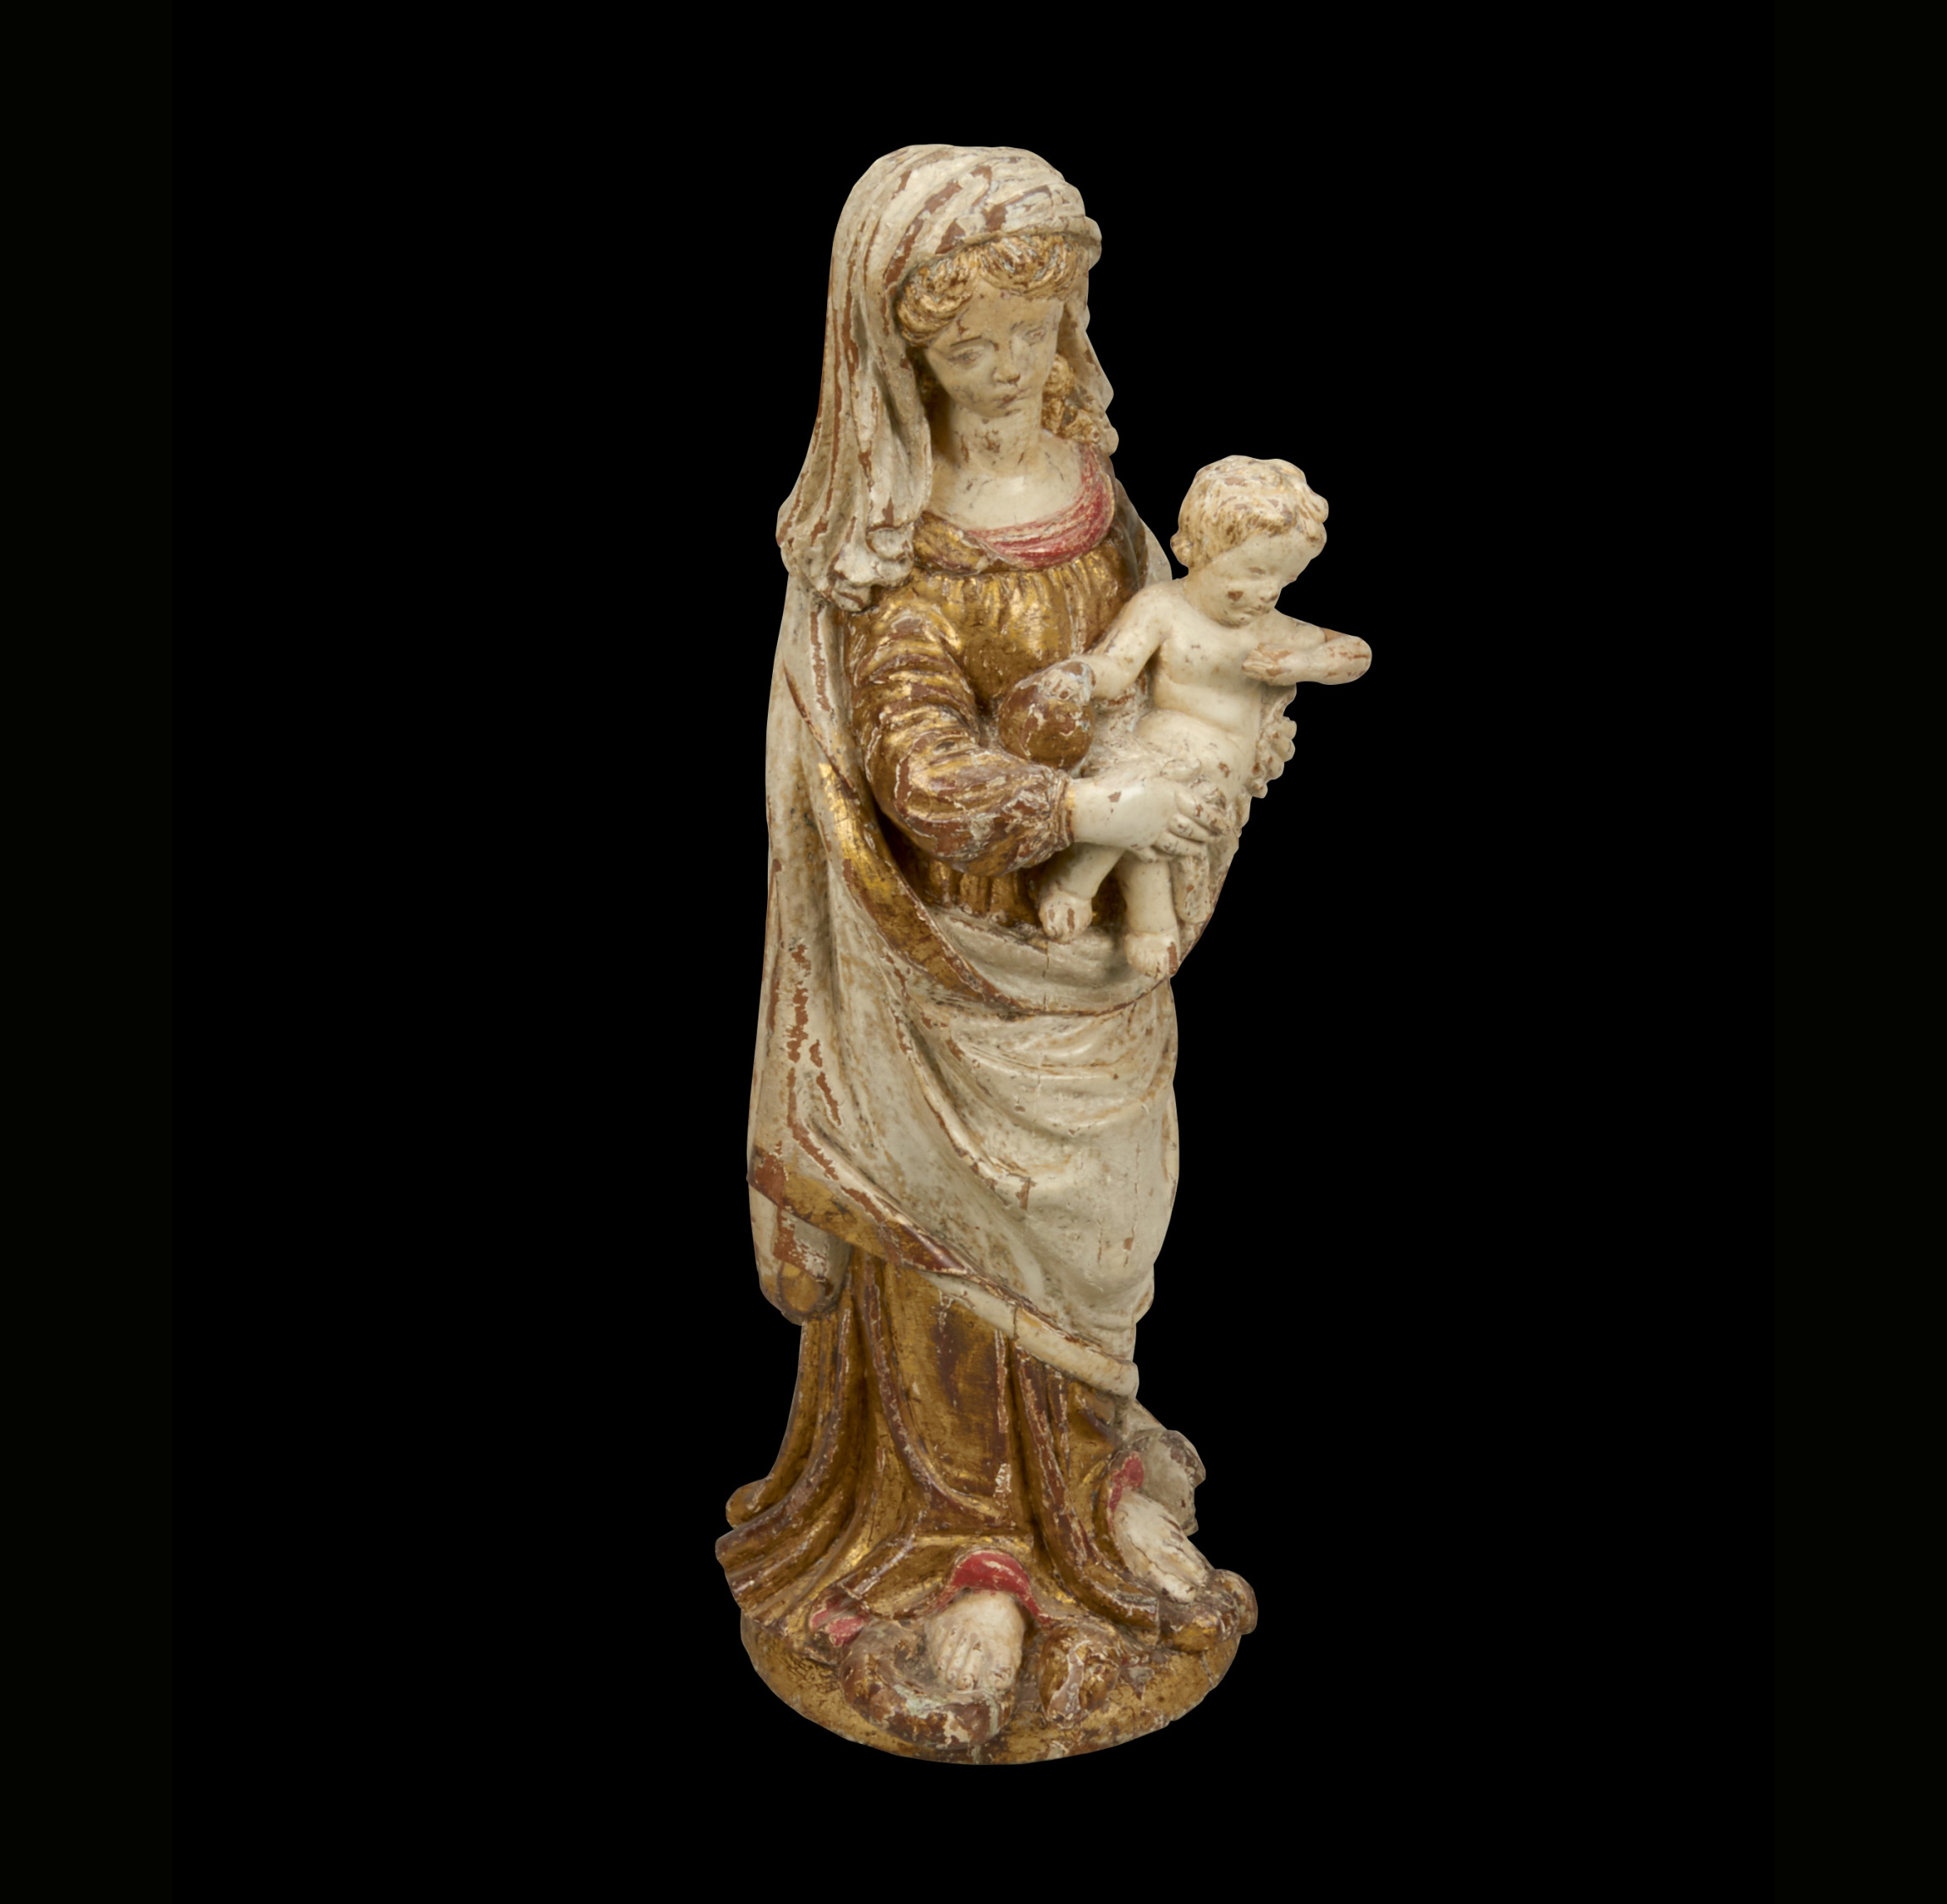 Small golden statue of a woman holding a child.